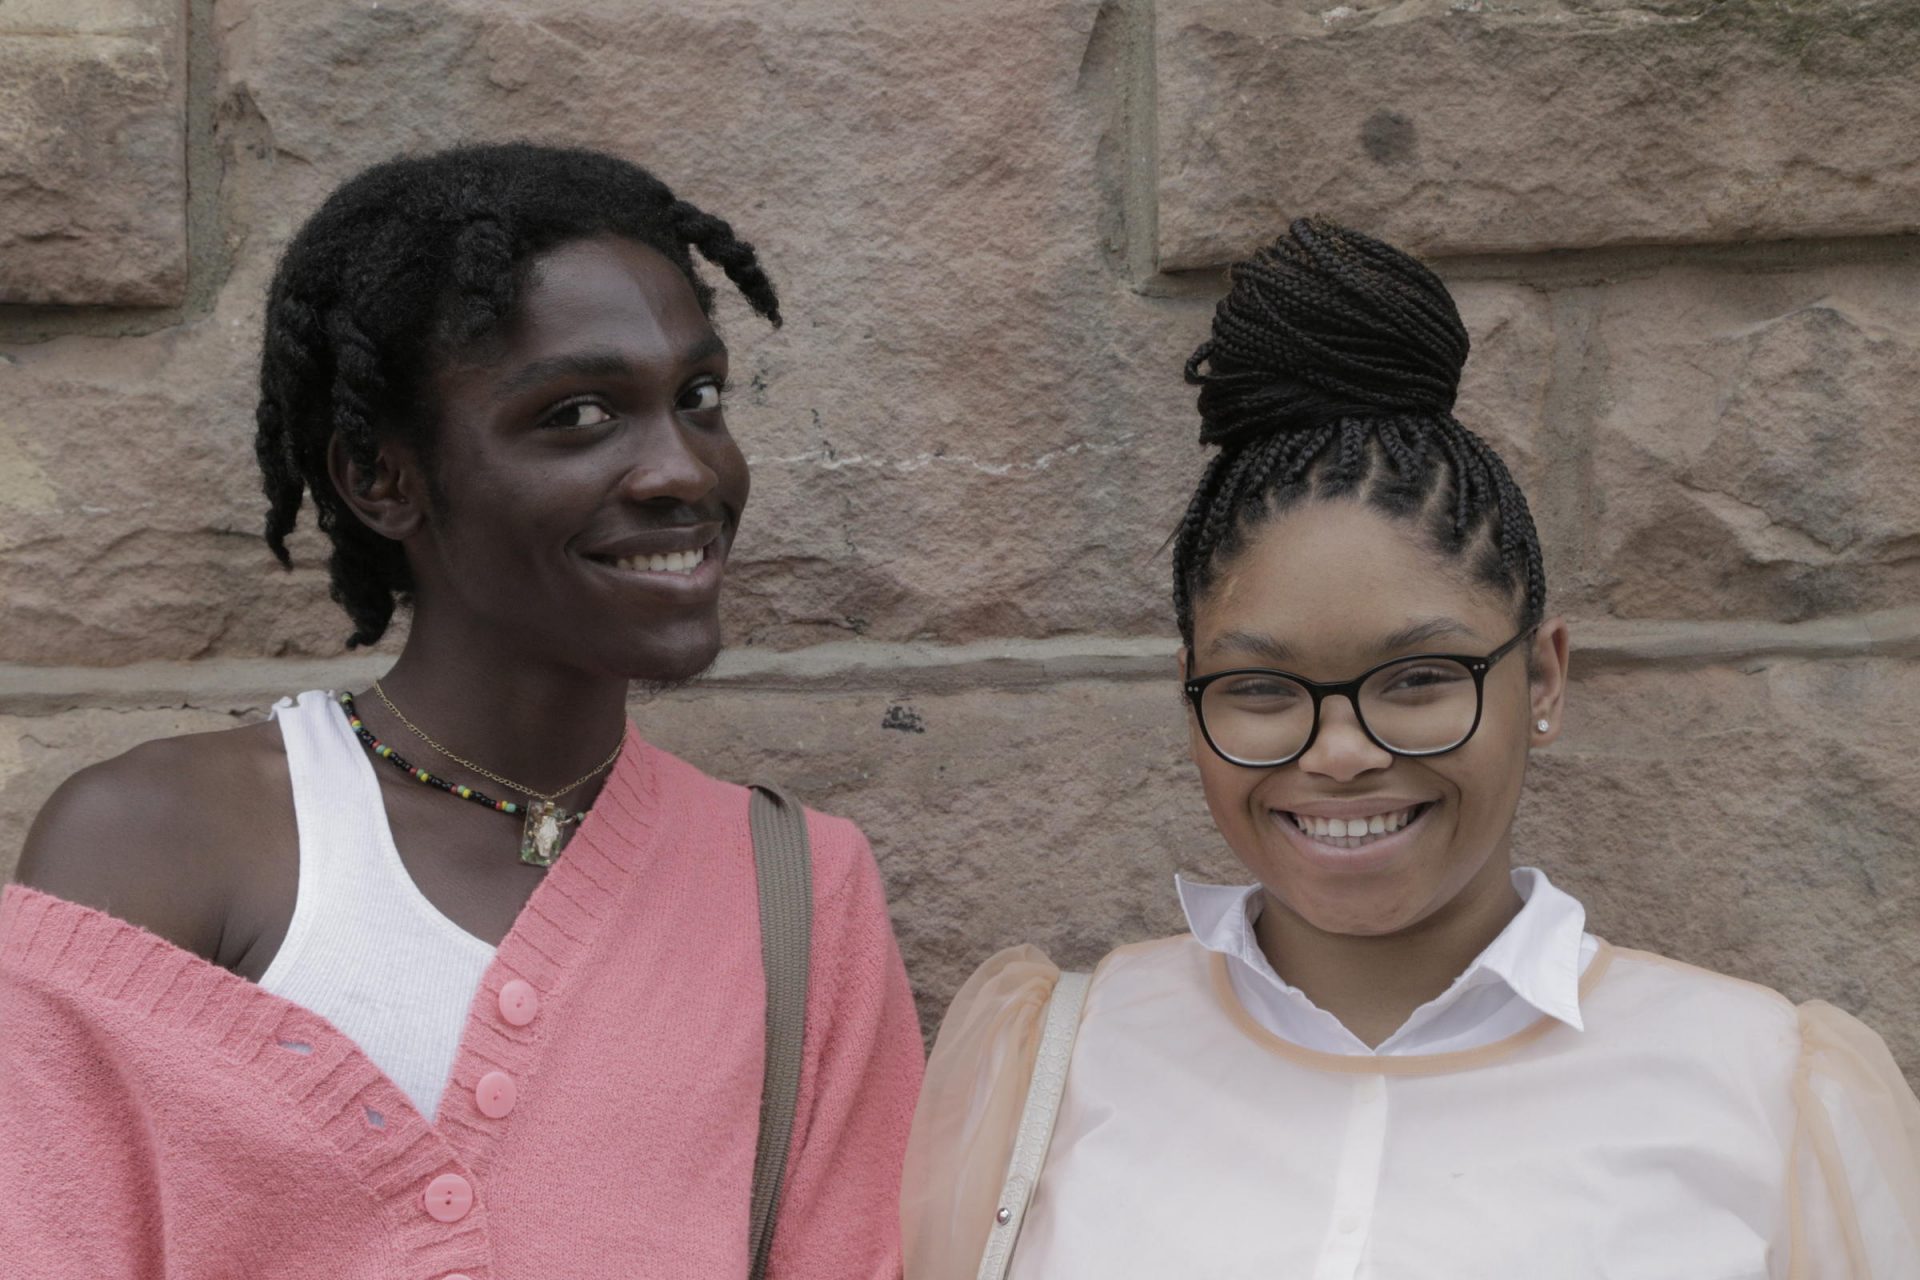 Nick Anglin (left) and Treasure Palmer, of Verona, formed Black, Young, and Educated while in high school. The two graduated this spring, Anglin from Central Catholic and Palmer from Oakland Catholic, and will start college in the fall.